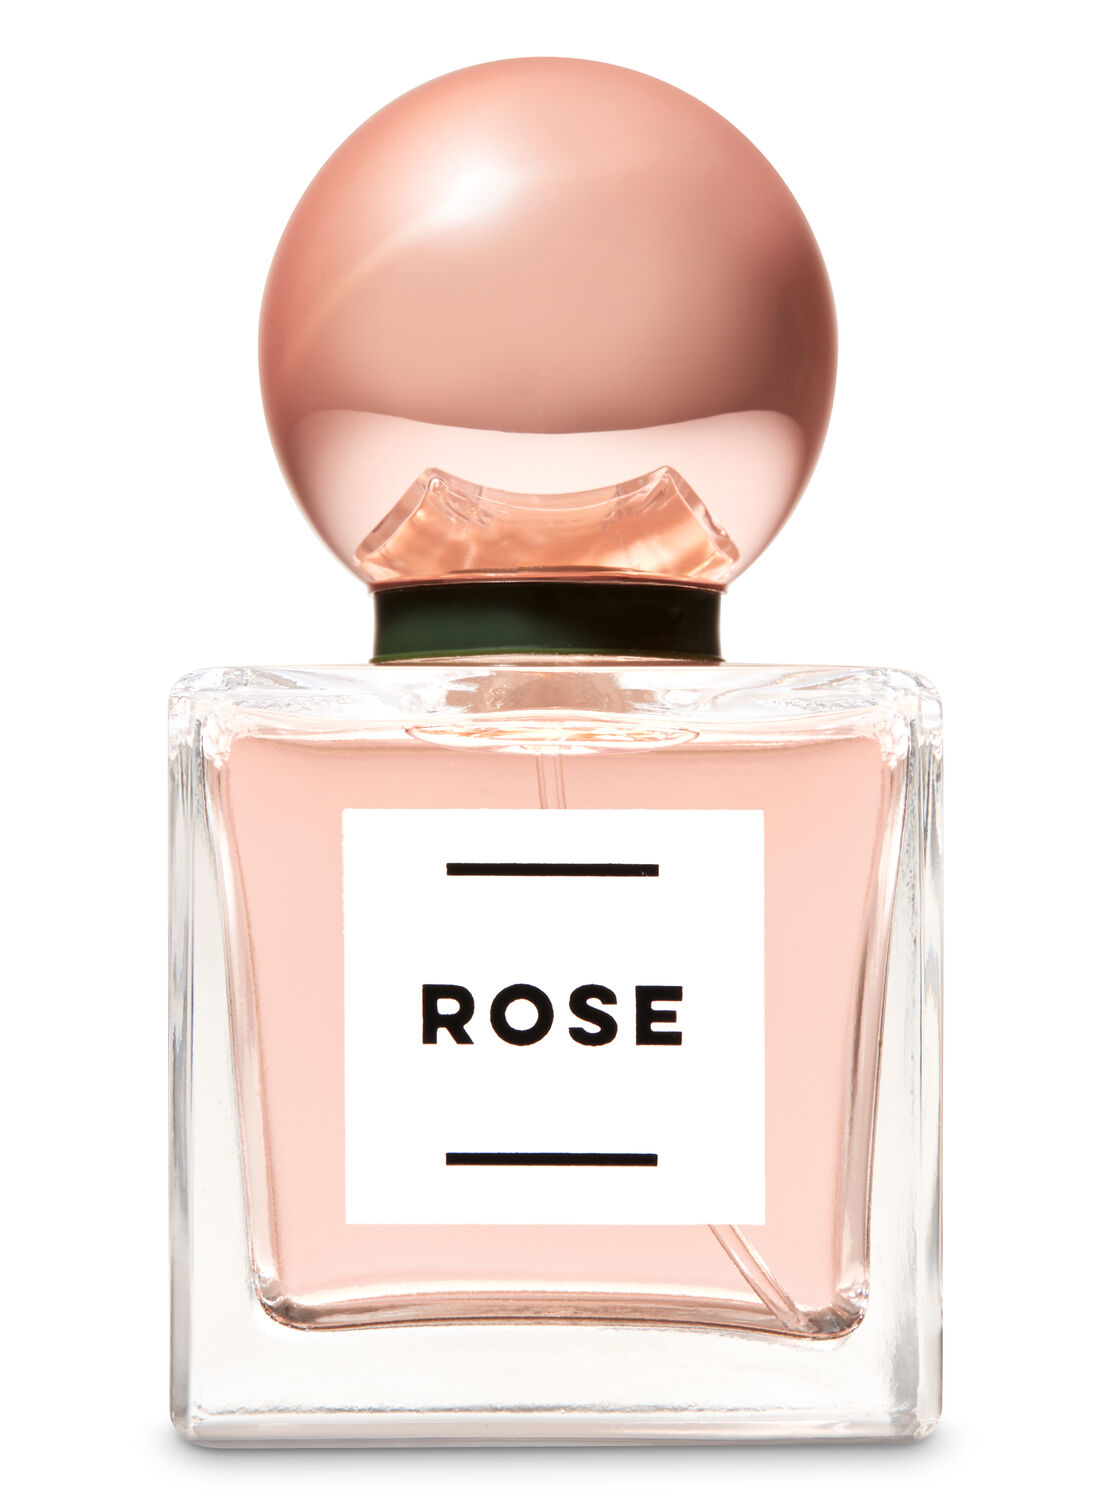 Rose Infused Beauty Products 2021 Rose Inspired Makeup And Skincare Stylecaster 